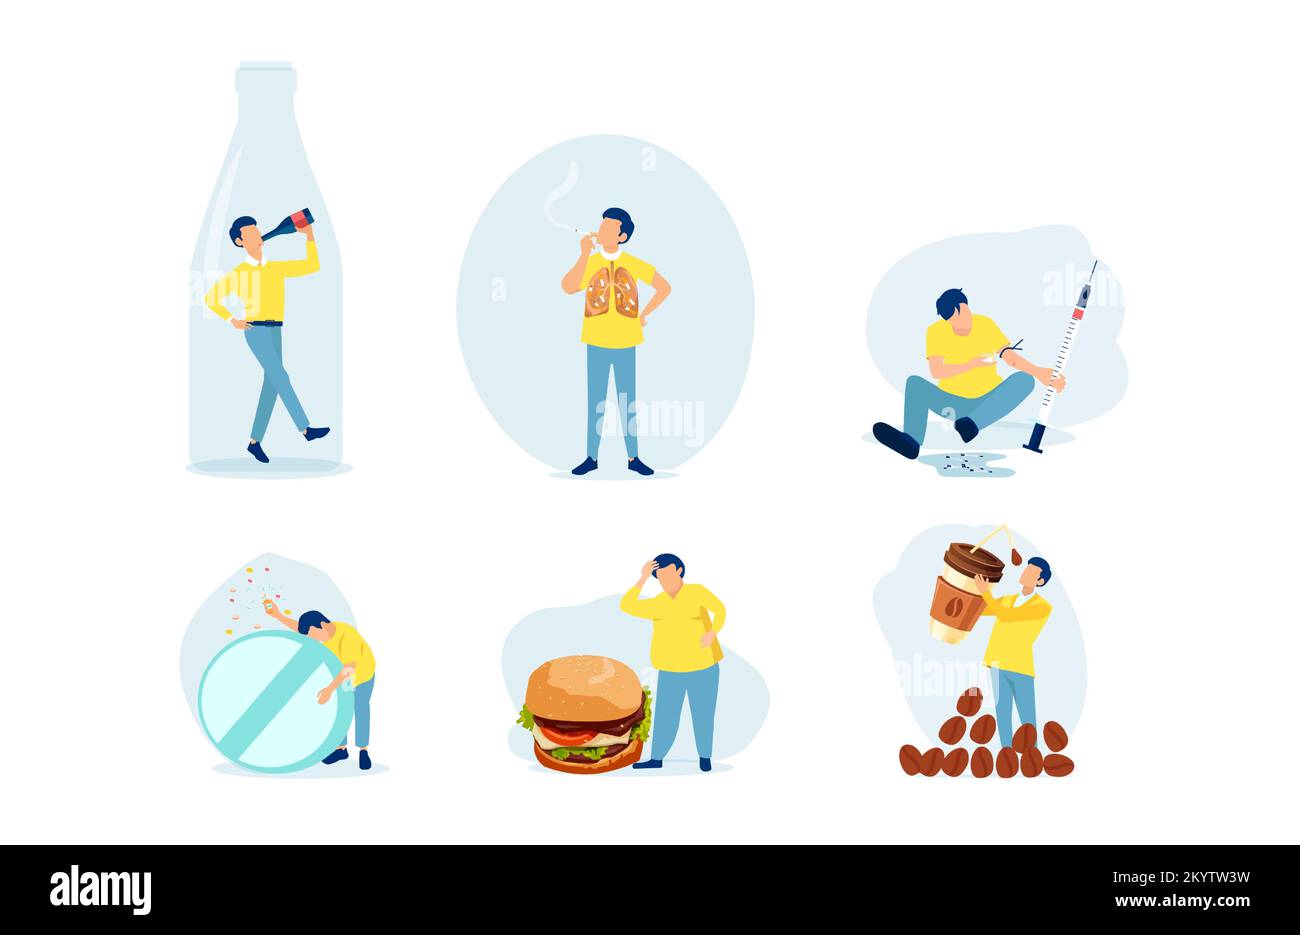 Vector of a young man with bad habits alcoholism, drug addiction, smoking, coffeemania, gluttony wand obesity Stock Vector